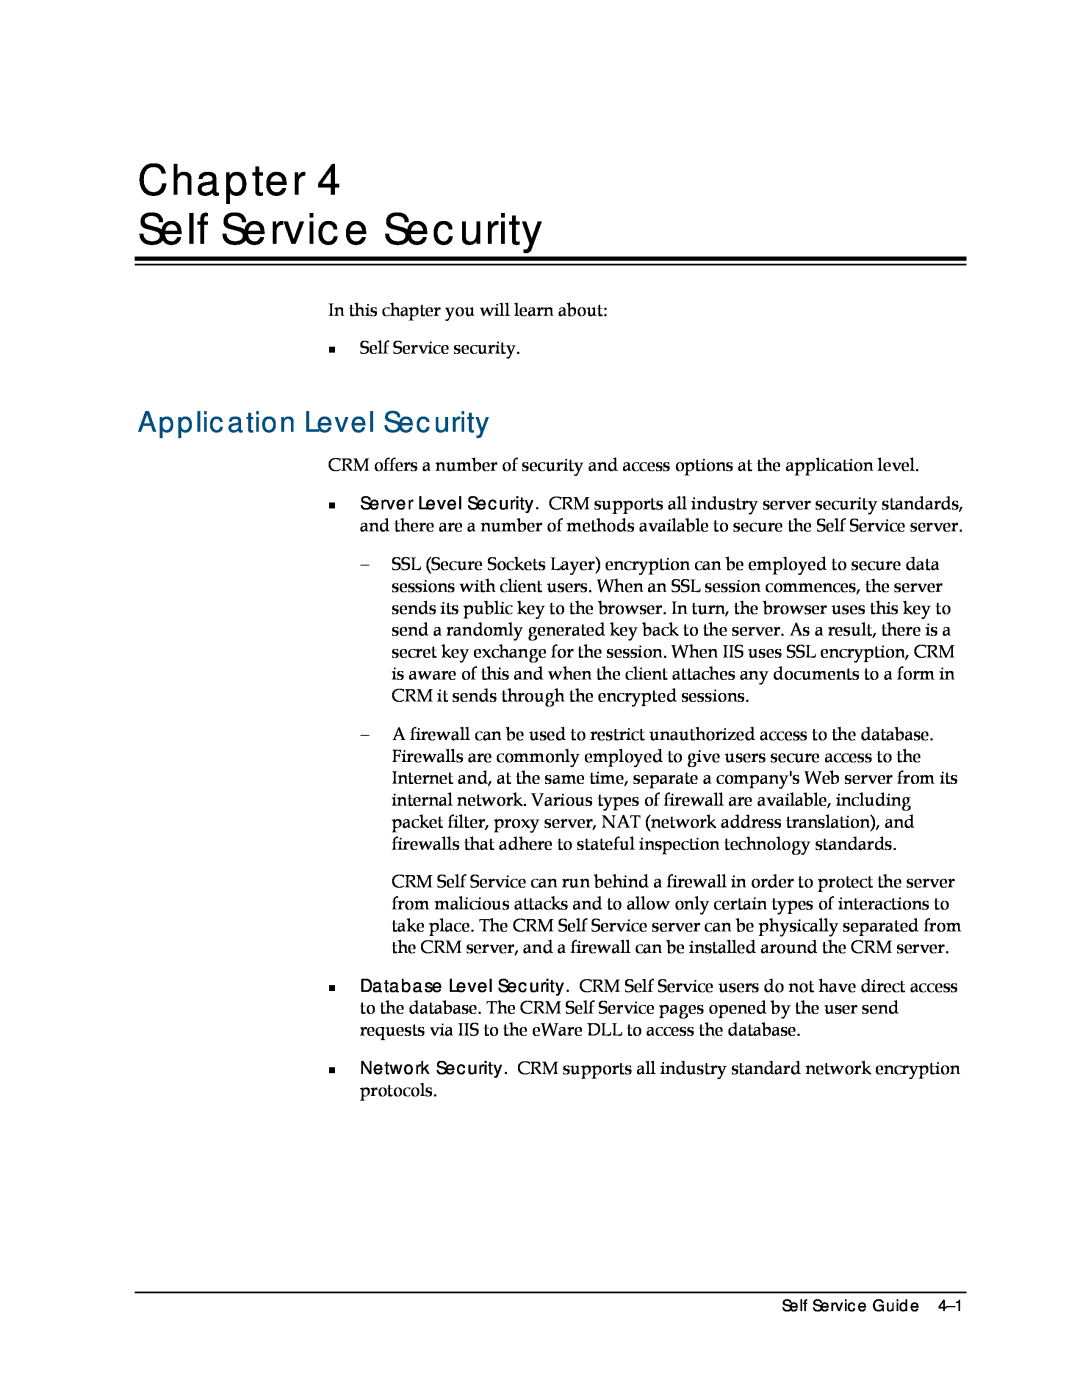 Sage Software 5.8 manual Chapter Self Service Security, Application Level Security 